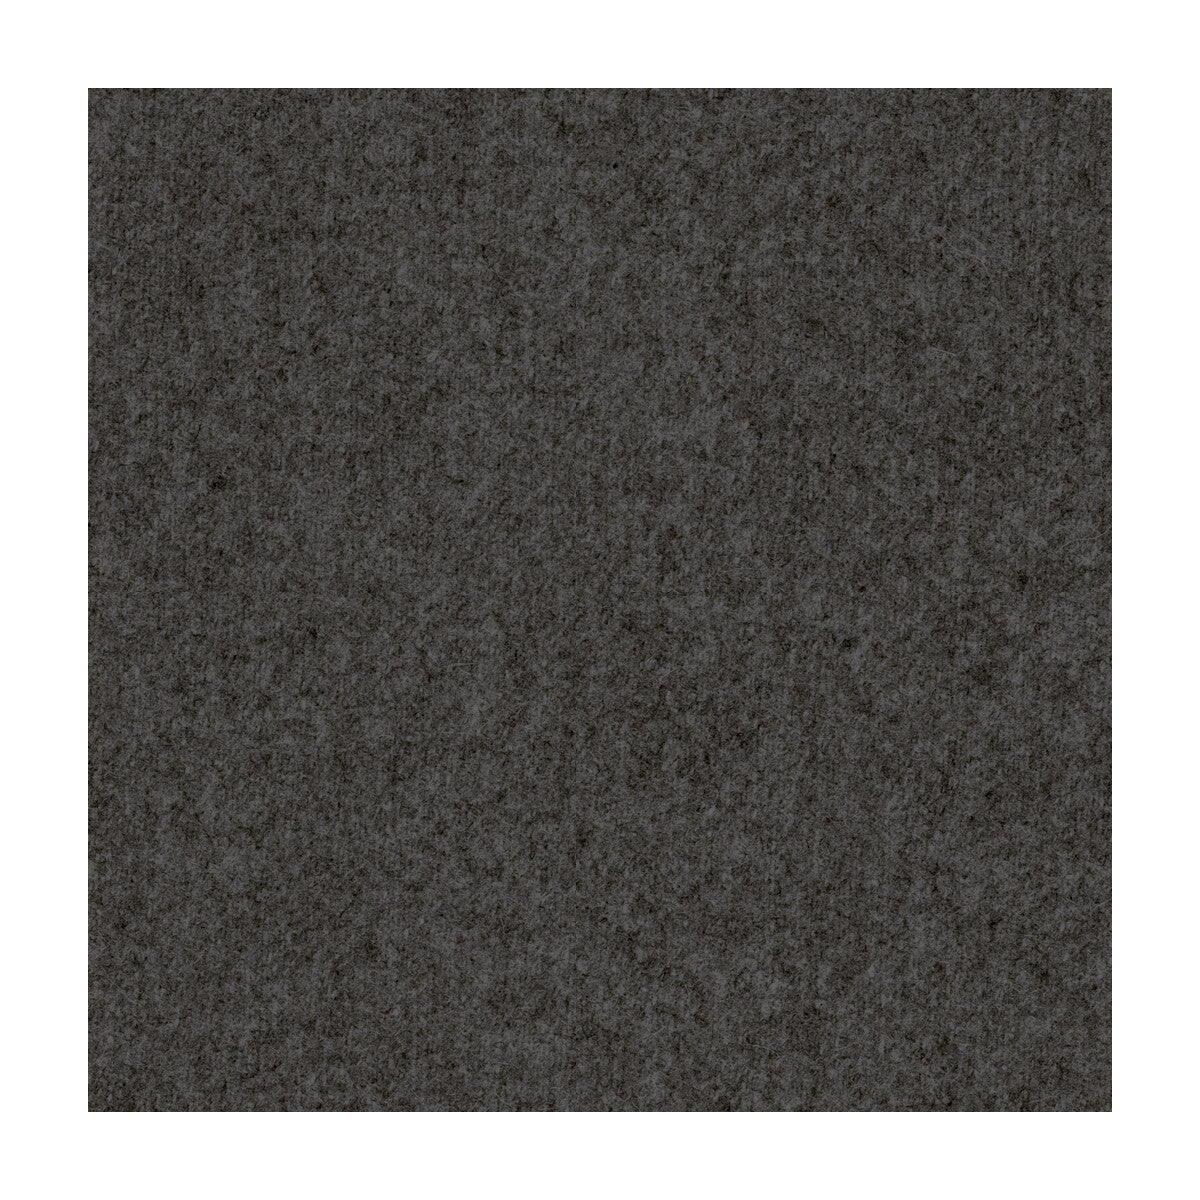 Jefferson Wool fabric in charcoal color - pattern 34397.2121.0 - by Kravet Contract